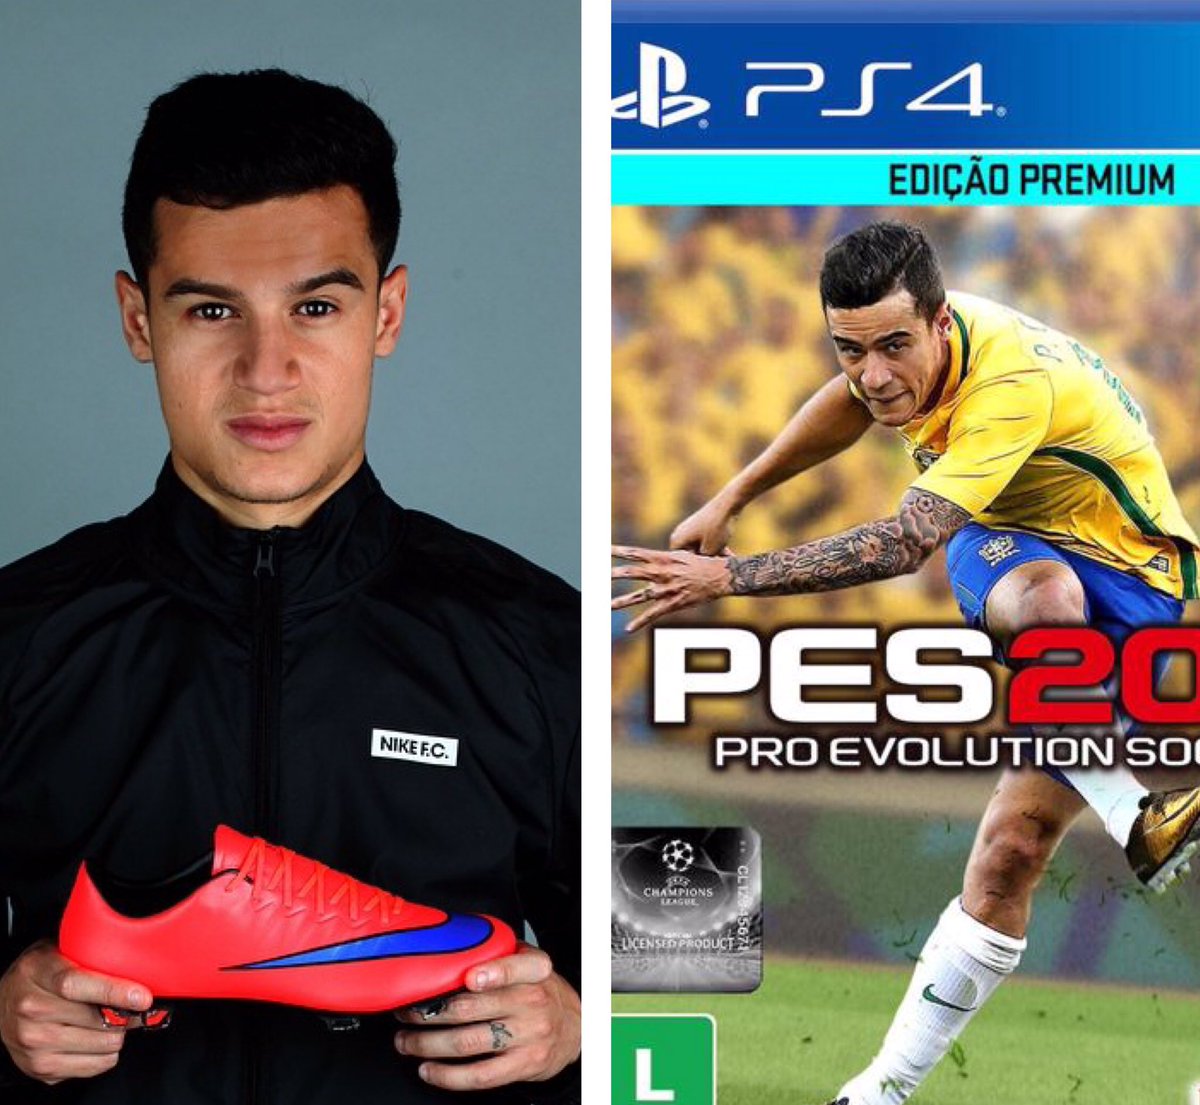 Caucho maníaco Primitivo Sports Business Inst en Twitter: "Coutinho is sponsored by Nike &amp; PES  Konami, two of FC Barcelona's club partners. Relevant consideration for  potential commercial synergies https://t.co/tENamAV0qd" / Twitter